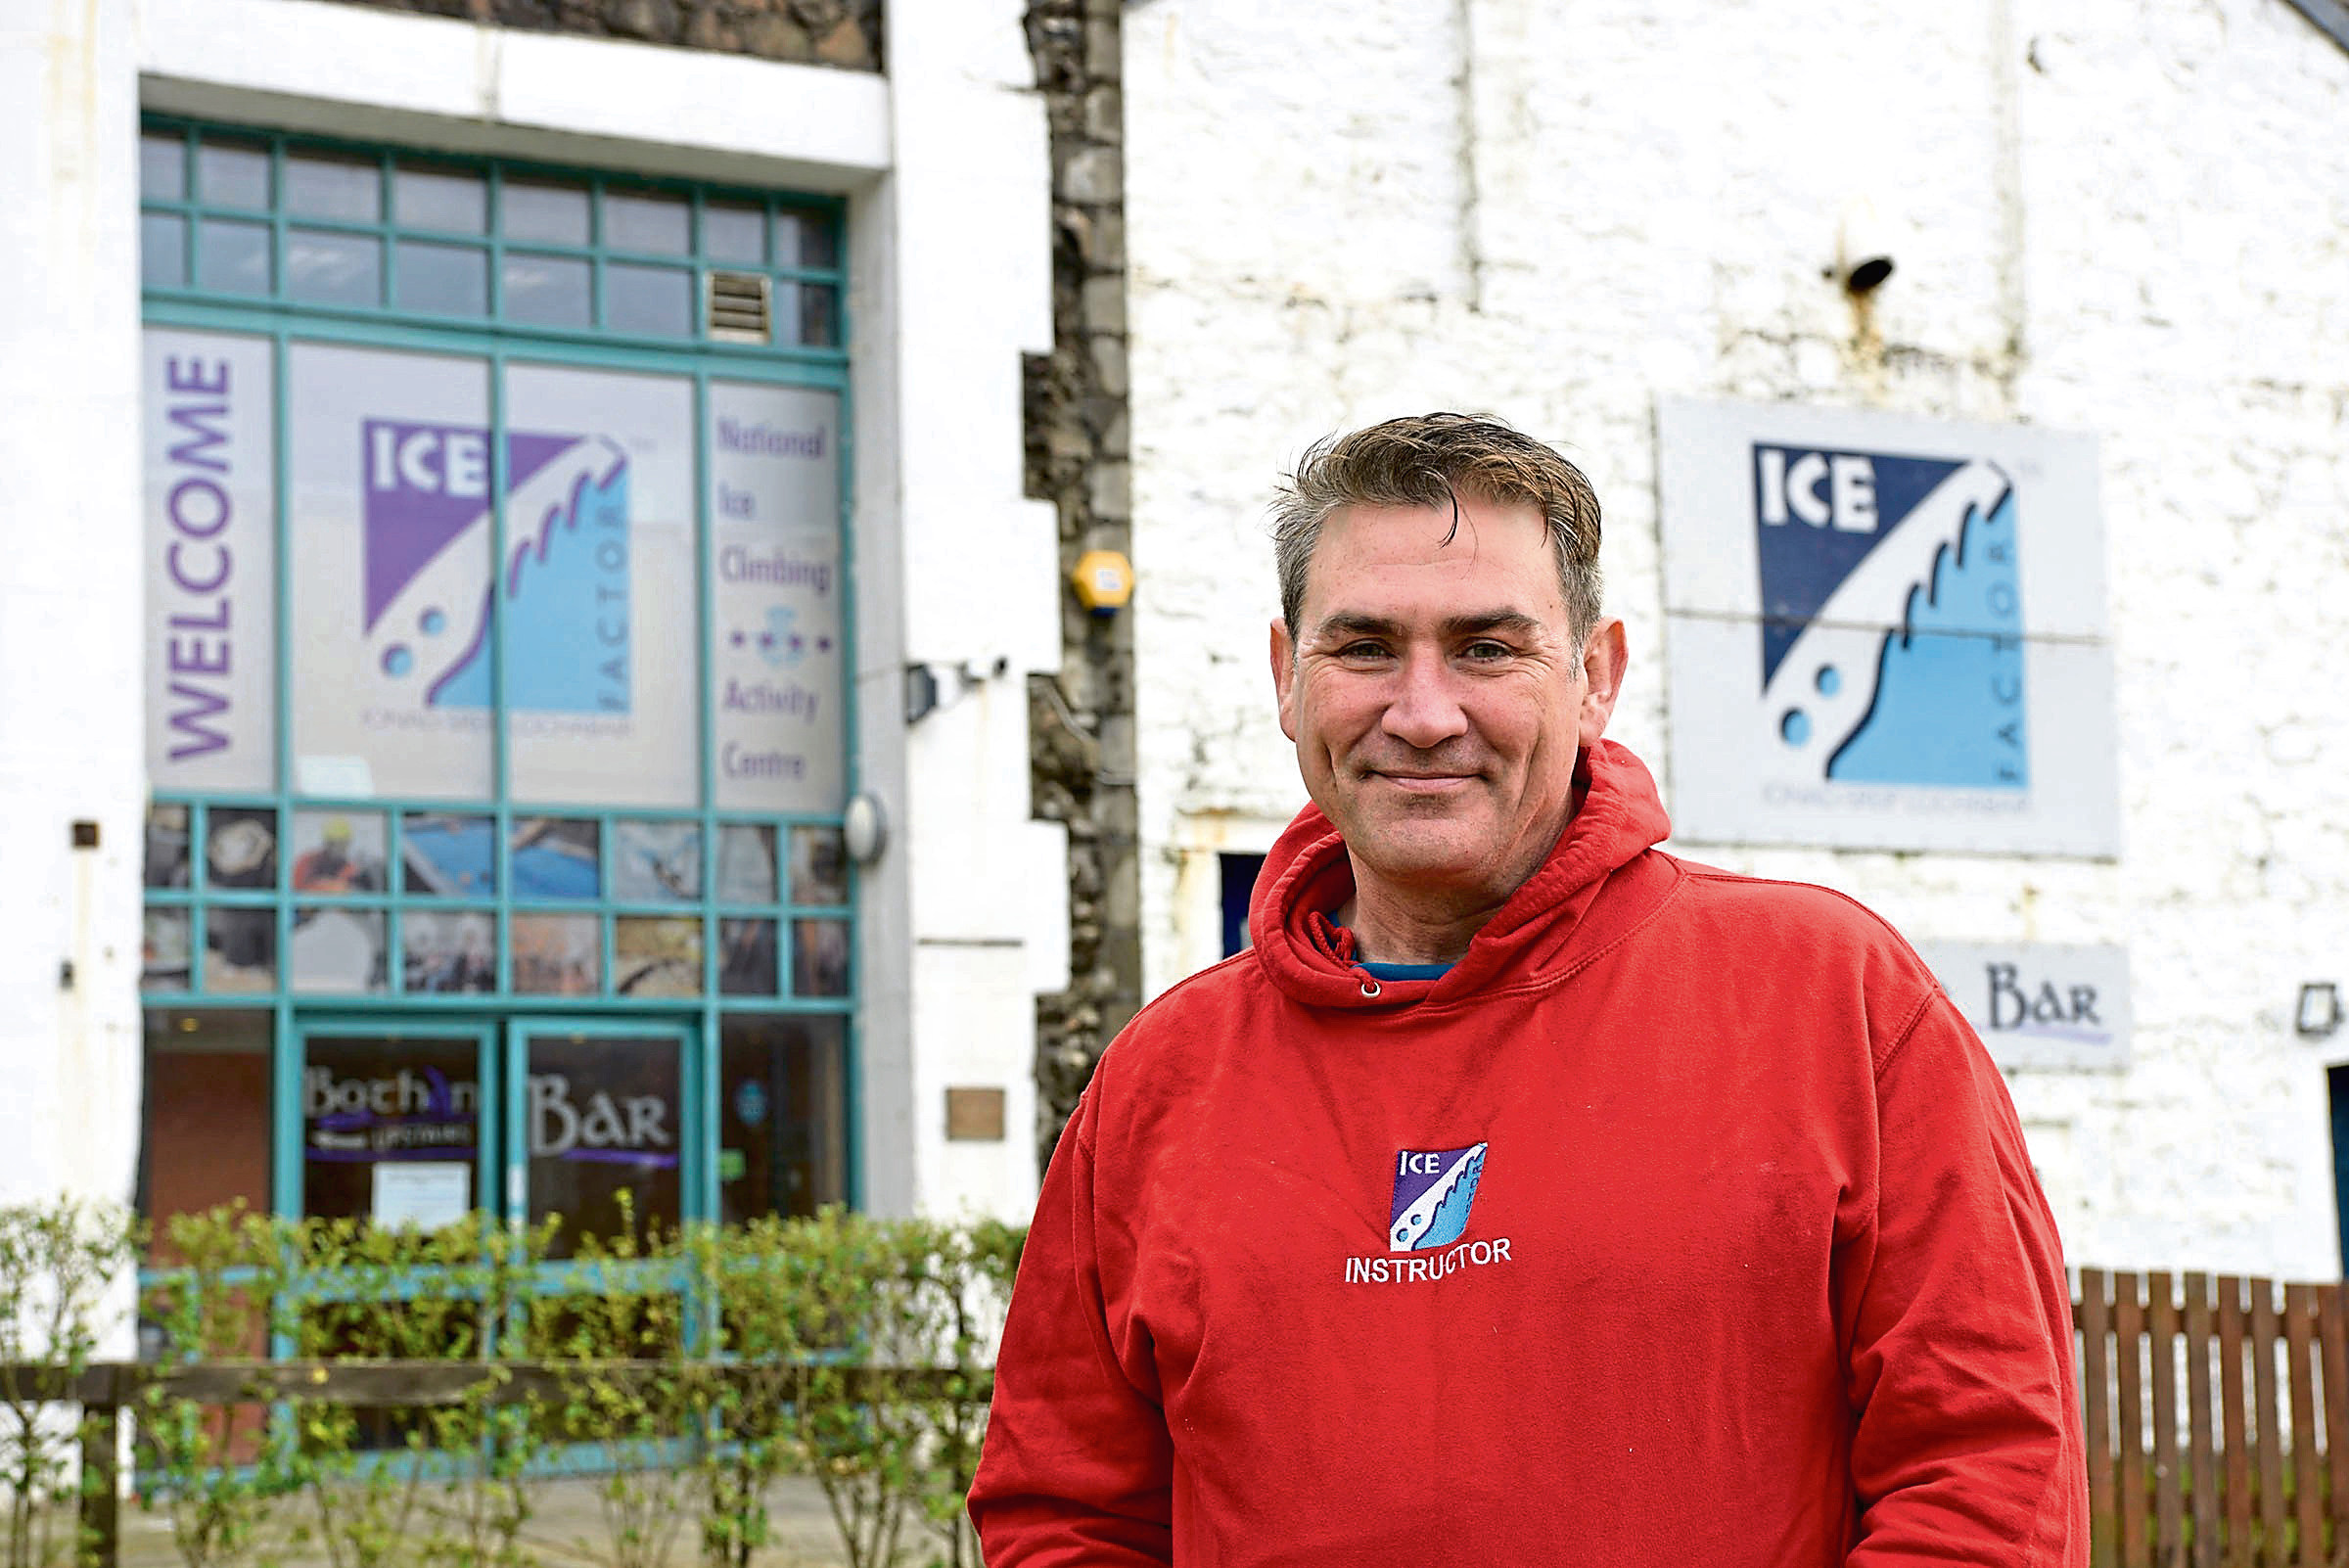 ICE FACTOR 3/2/16 Jamie Smith outside the soon-to-re-open, Ice Factor. PICTURE IAIN FERGUSON, THE WRITE IMAGE